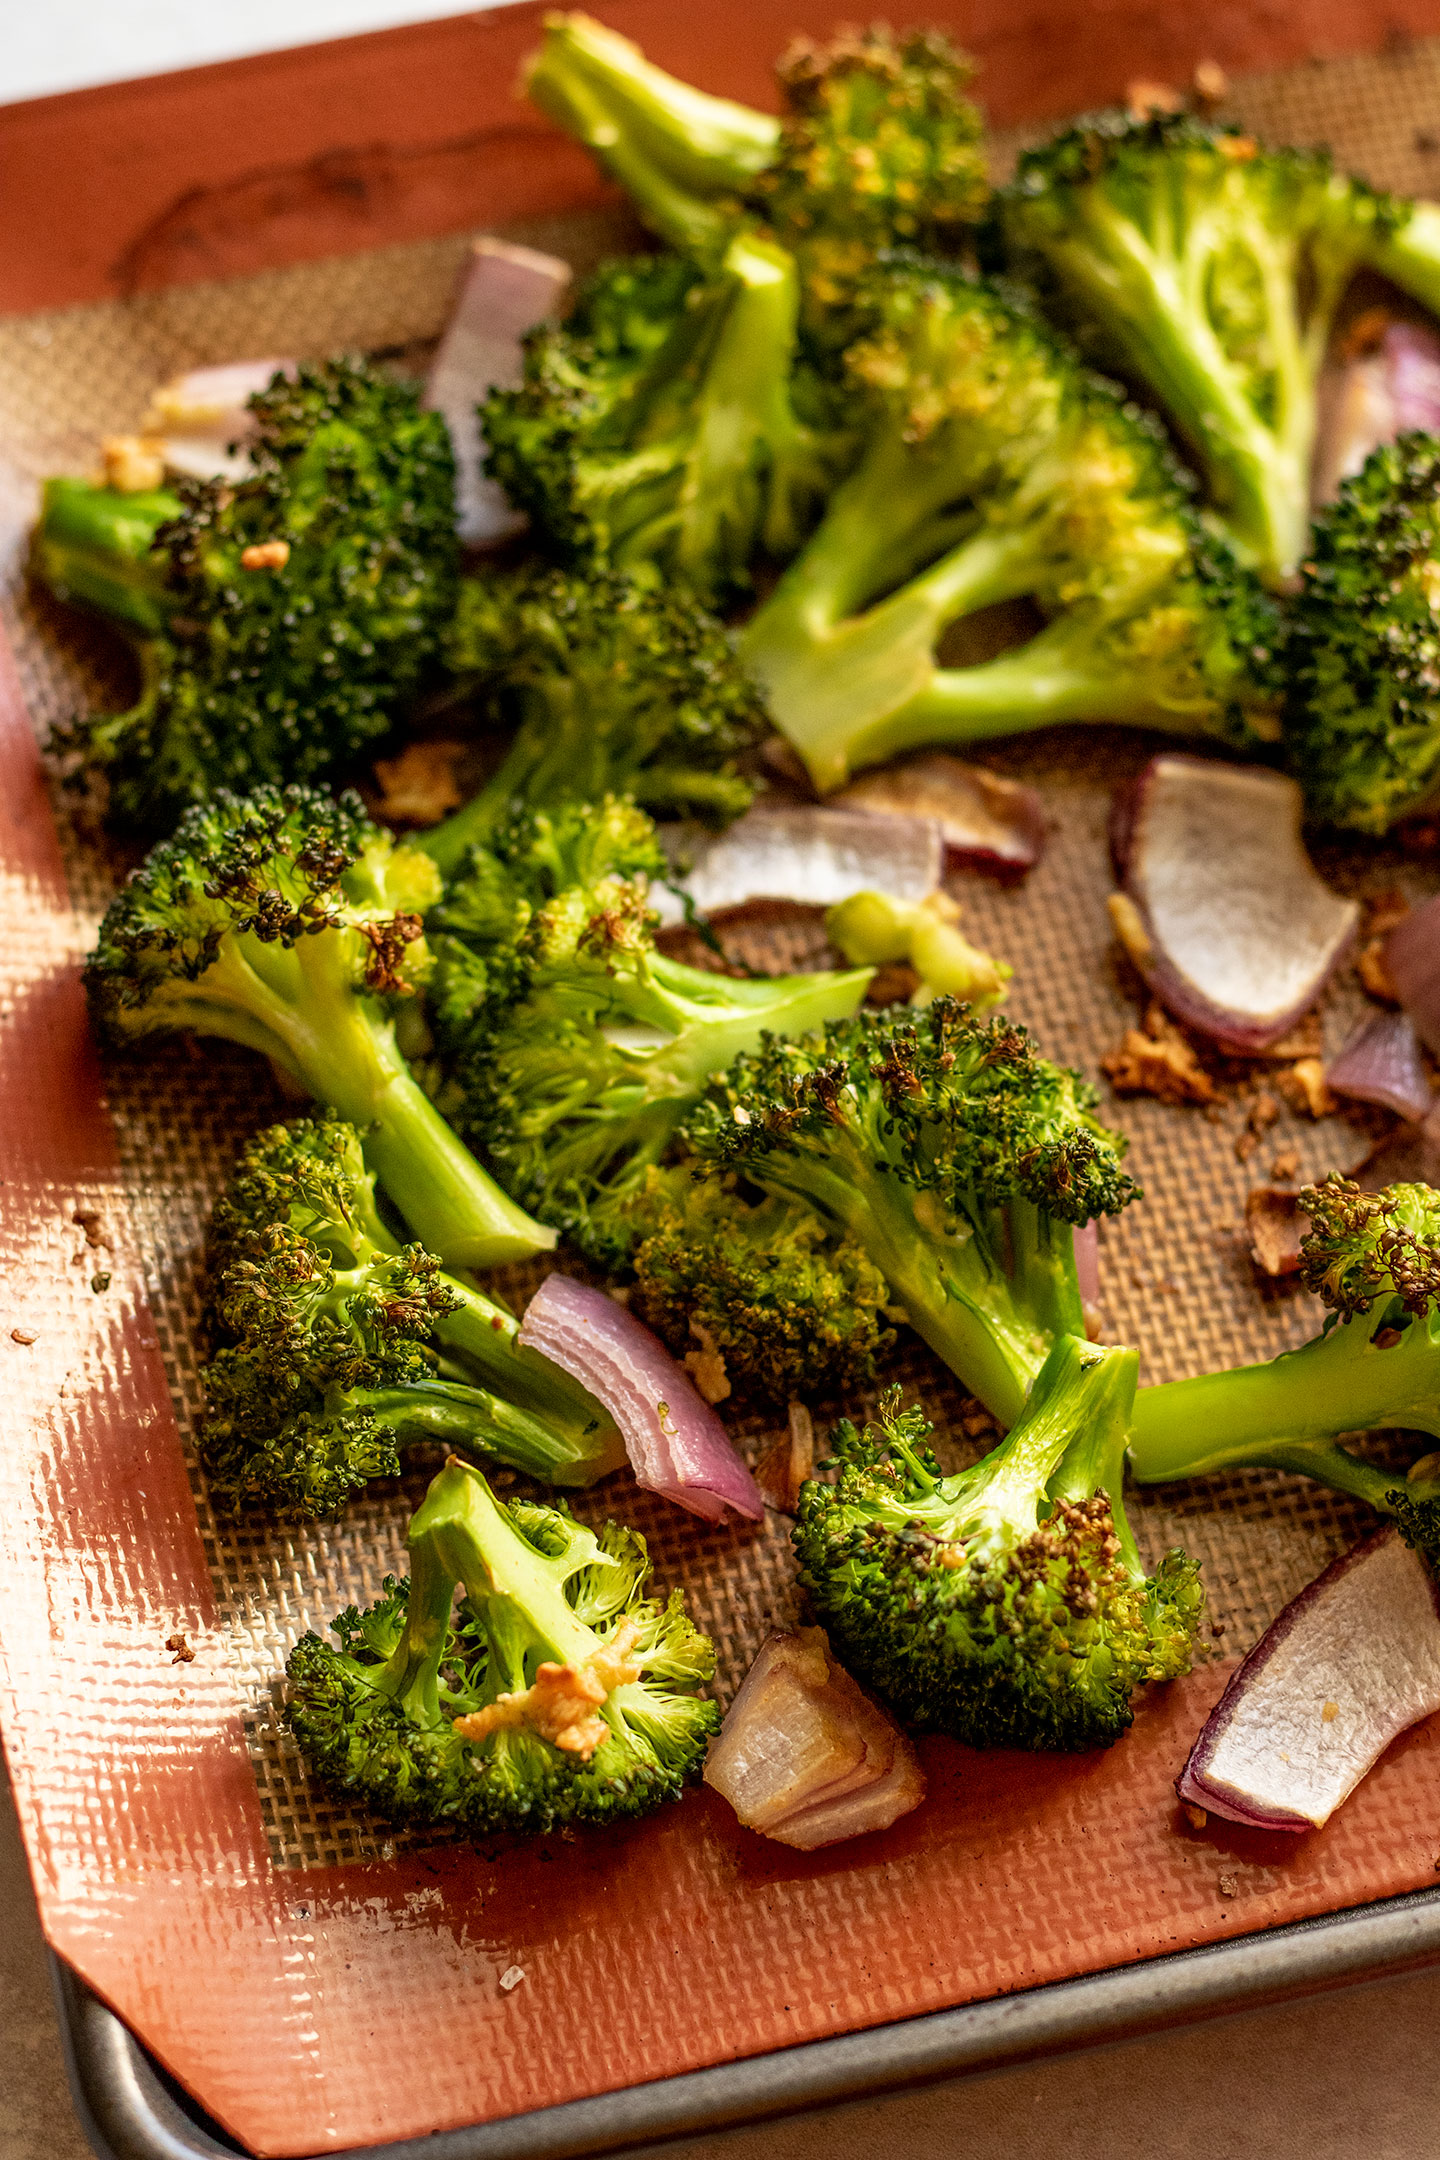 Roasted broccoli, onions and garlic on a baking tray.